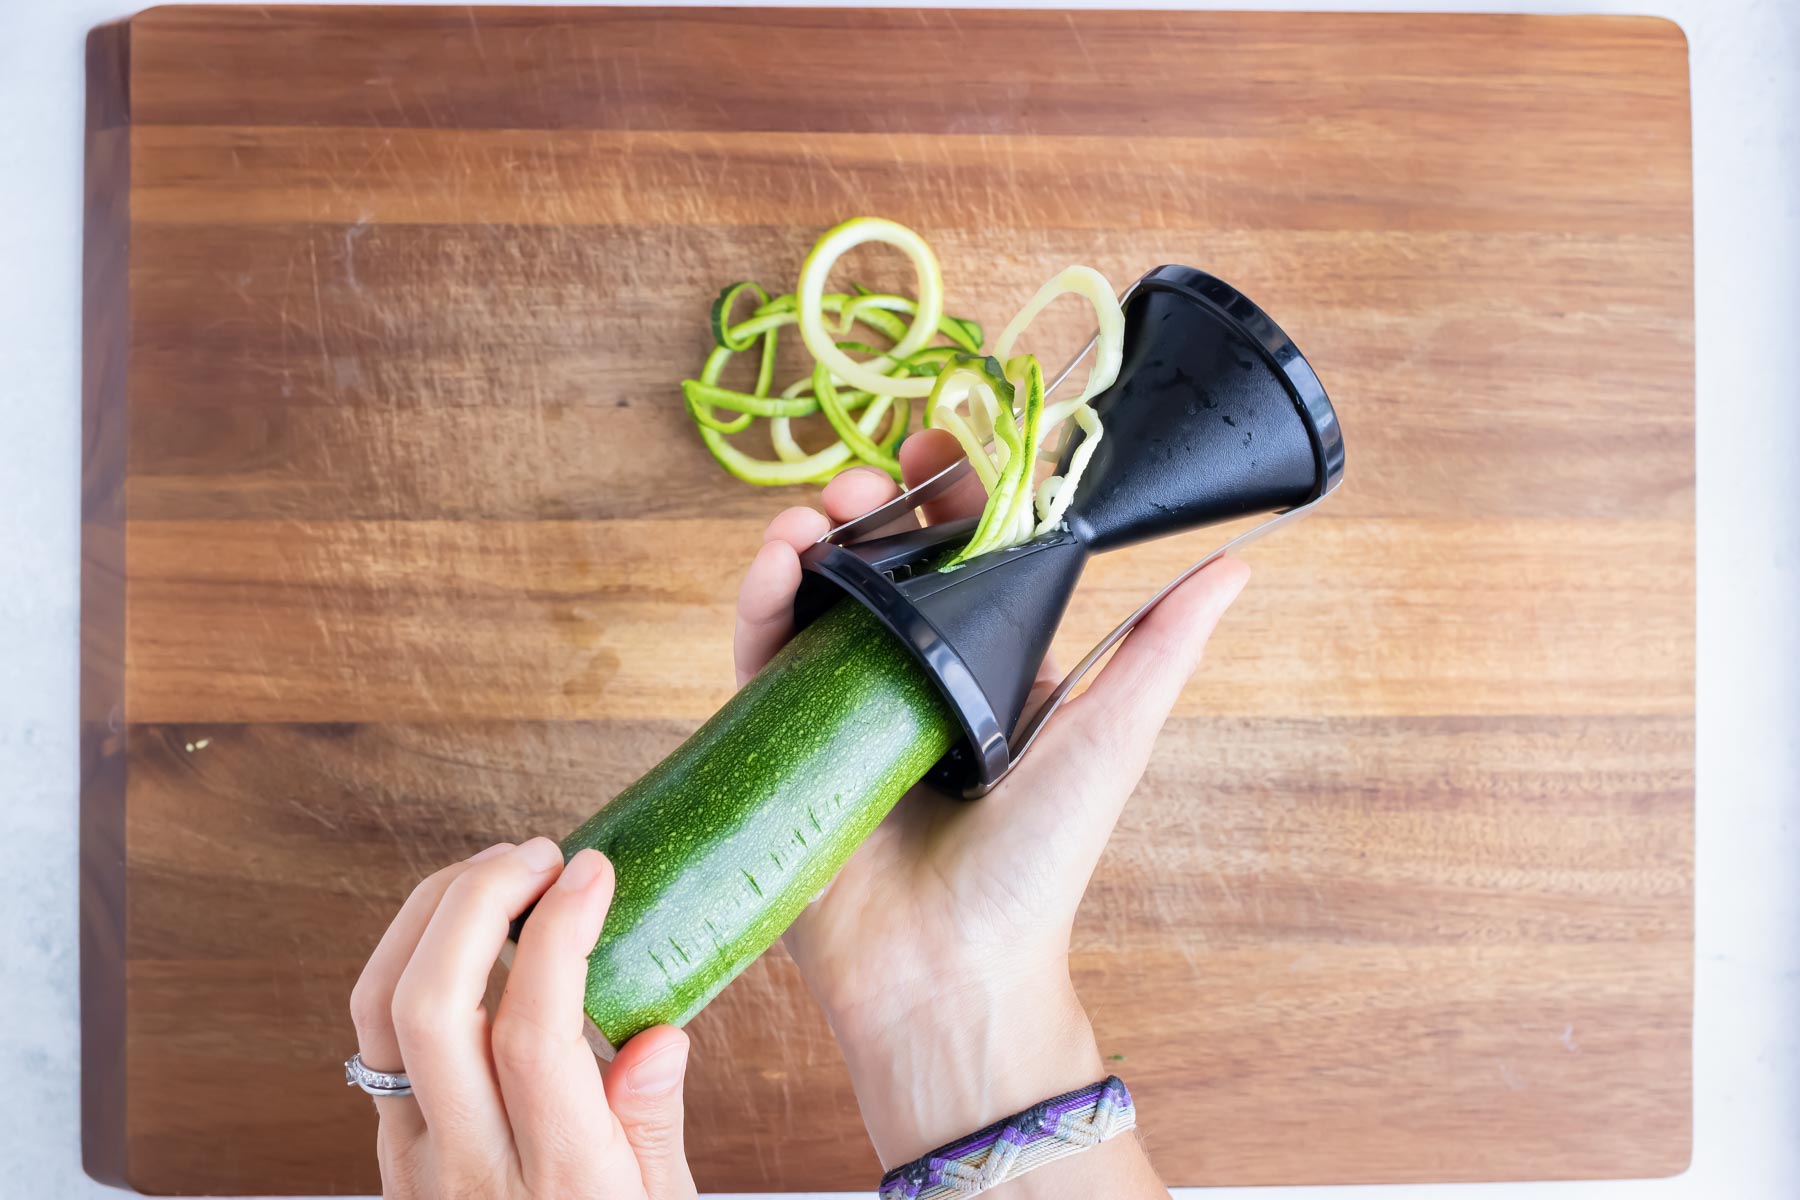 How to use a handheld veggie spiralizer to make zucchini noodles.